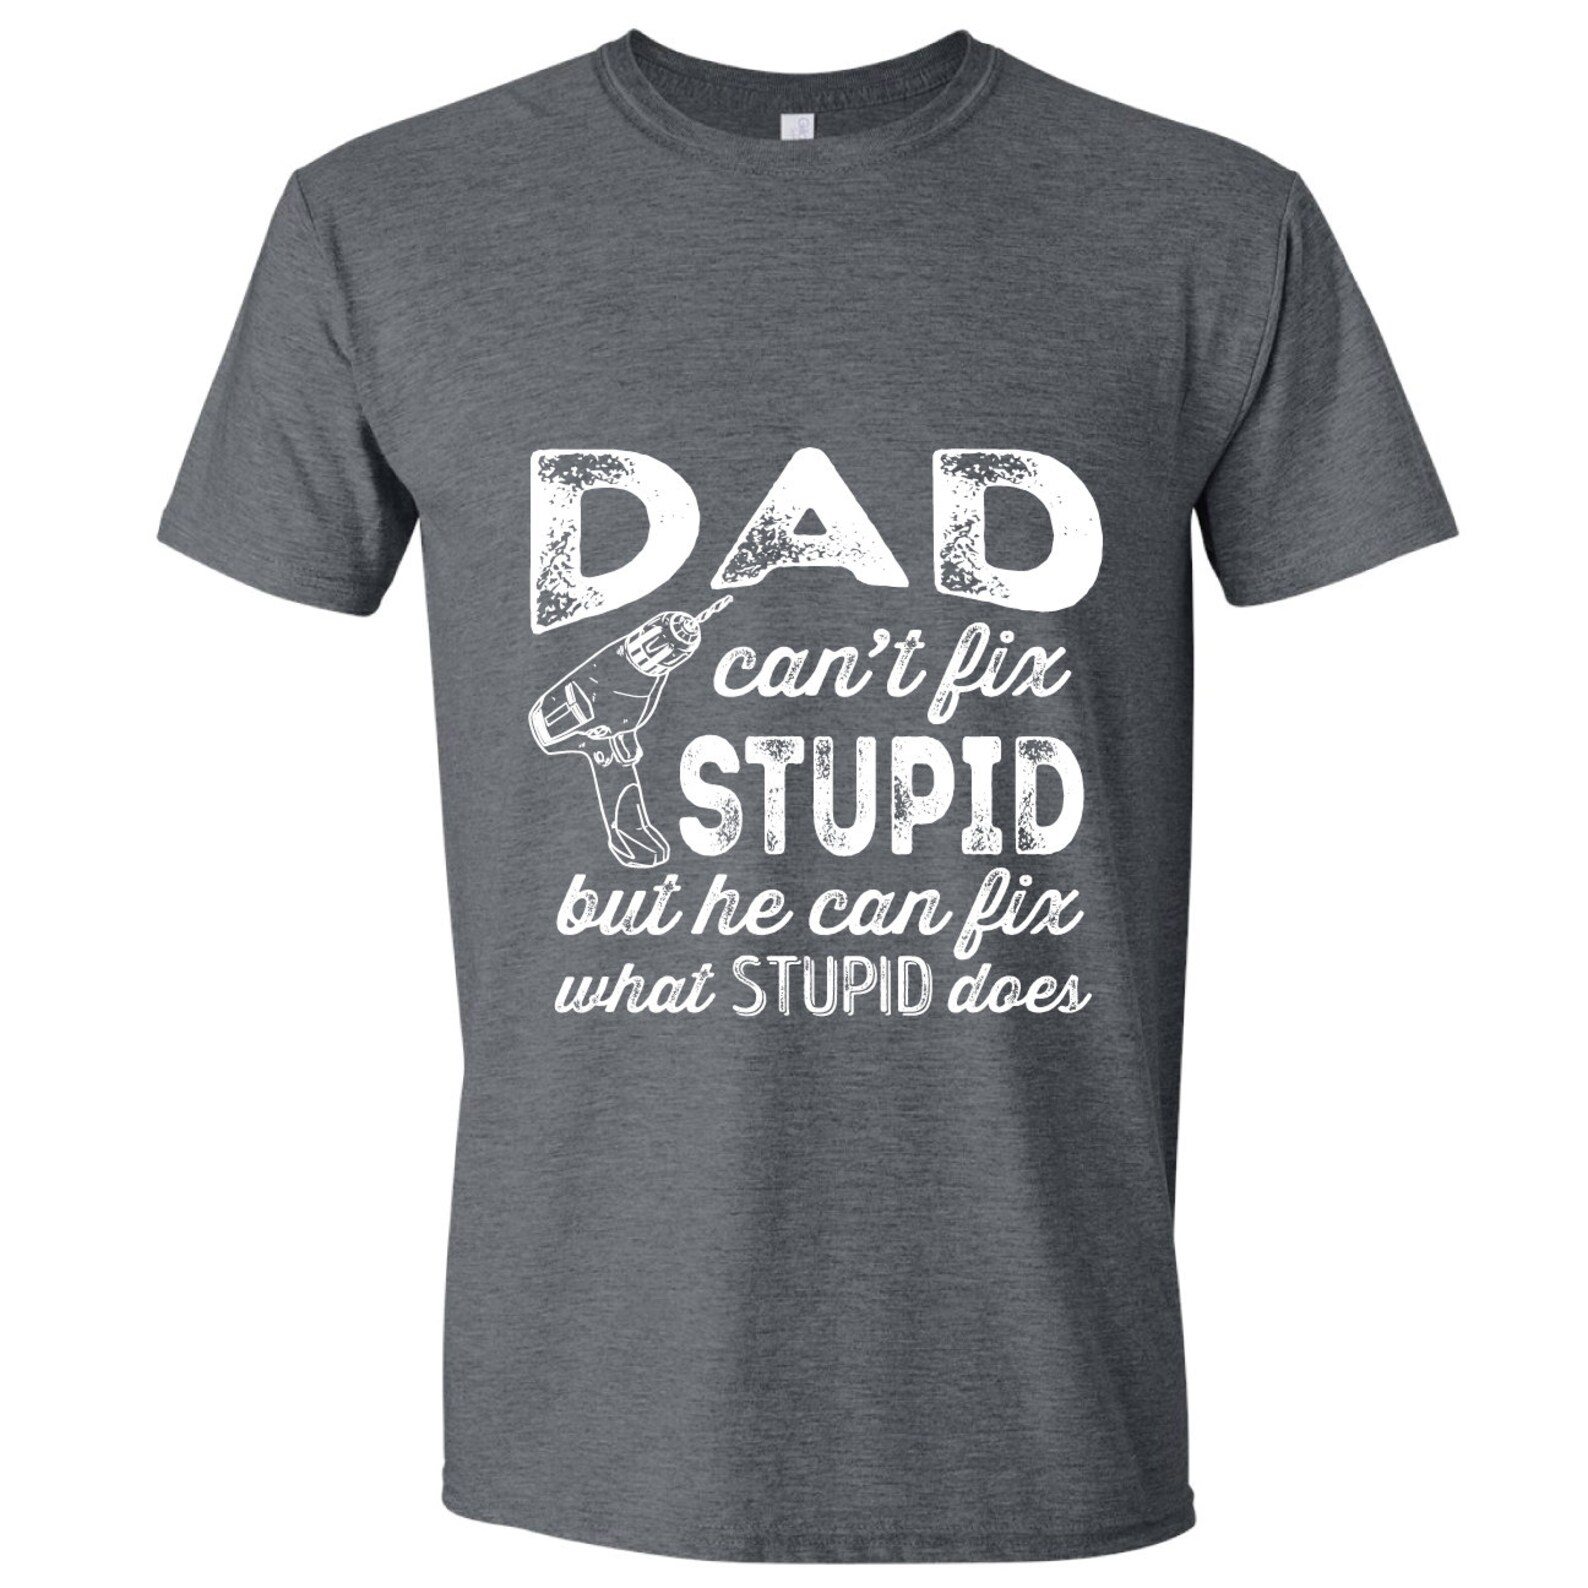 My dad shopping. Daddy t Shirt. Best dad Shirt. Special dad Shirt. Fat dad on the Shirt youtube.